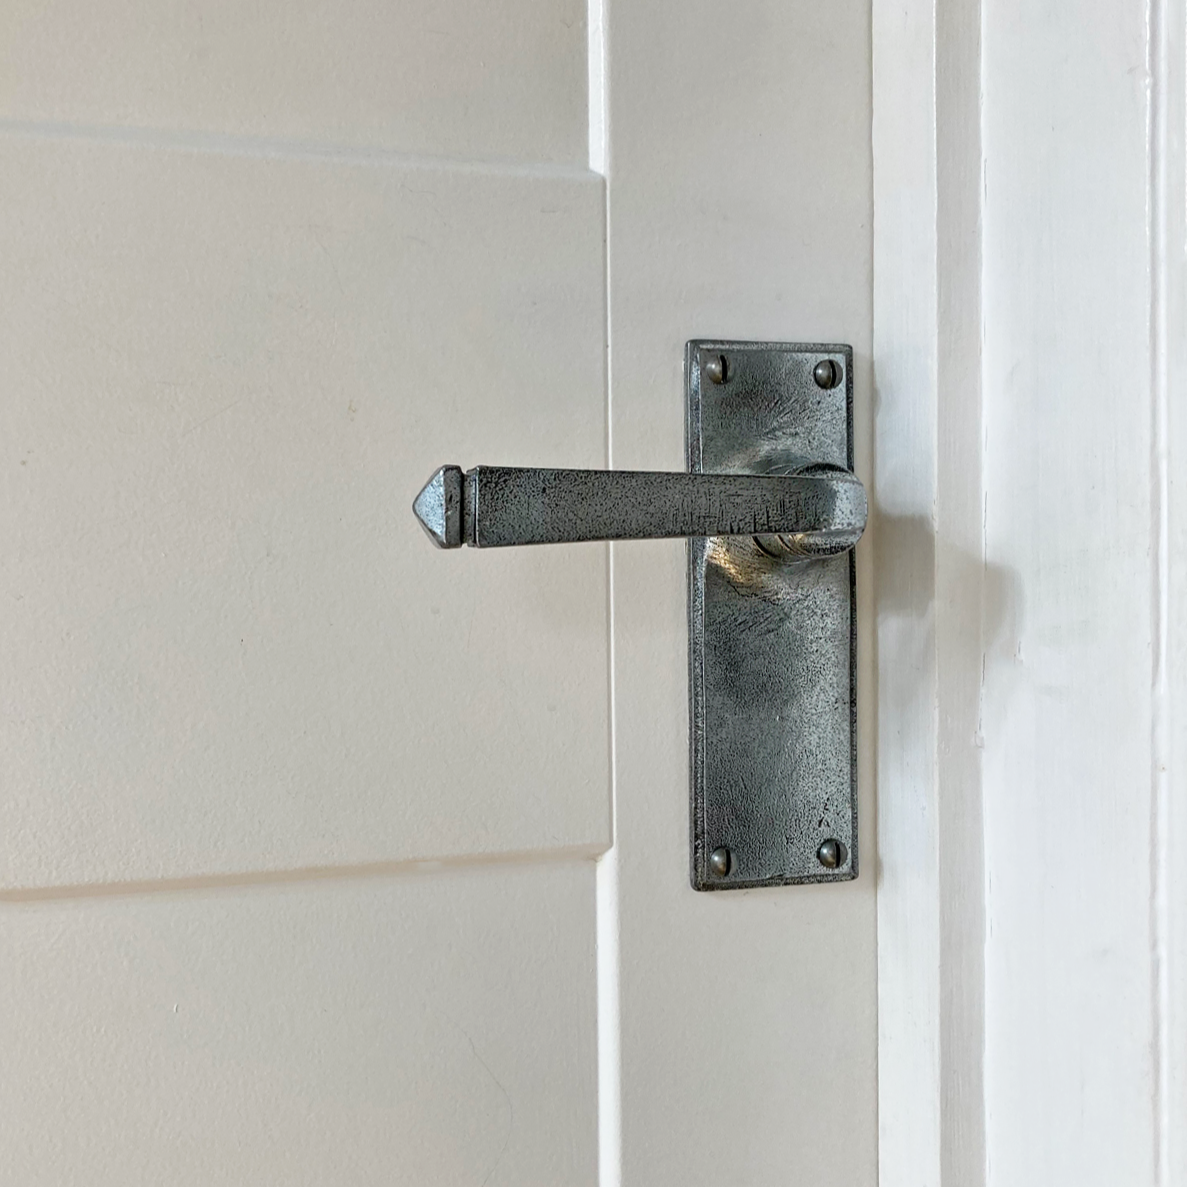 Avon lever pewter handle on a door SHOW